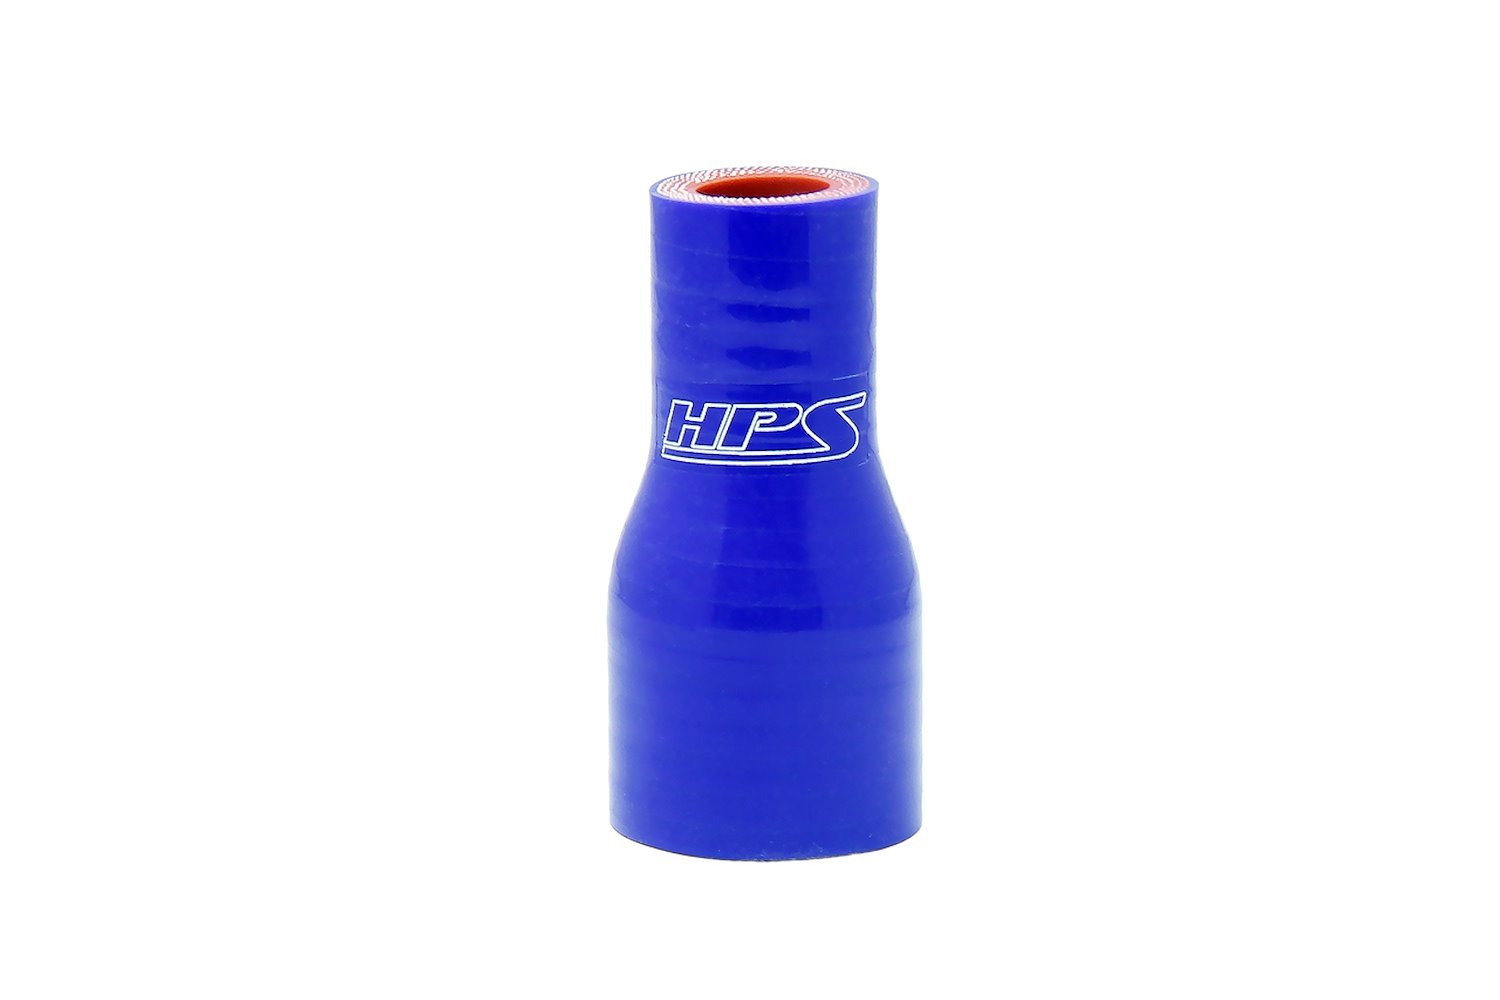 HTSR-075-150-BLUE Silicone Reducer Hose, High-Temp 4-Ply Reinforced, 3/4 in. - 1-1/2 in. ID, 3 in. Long, Blue